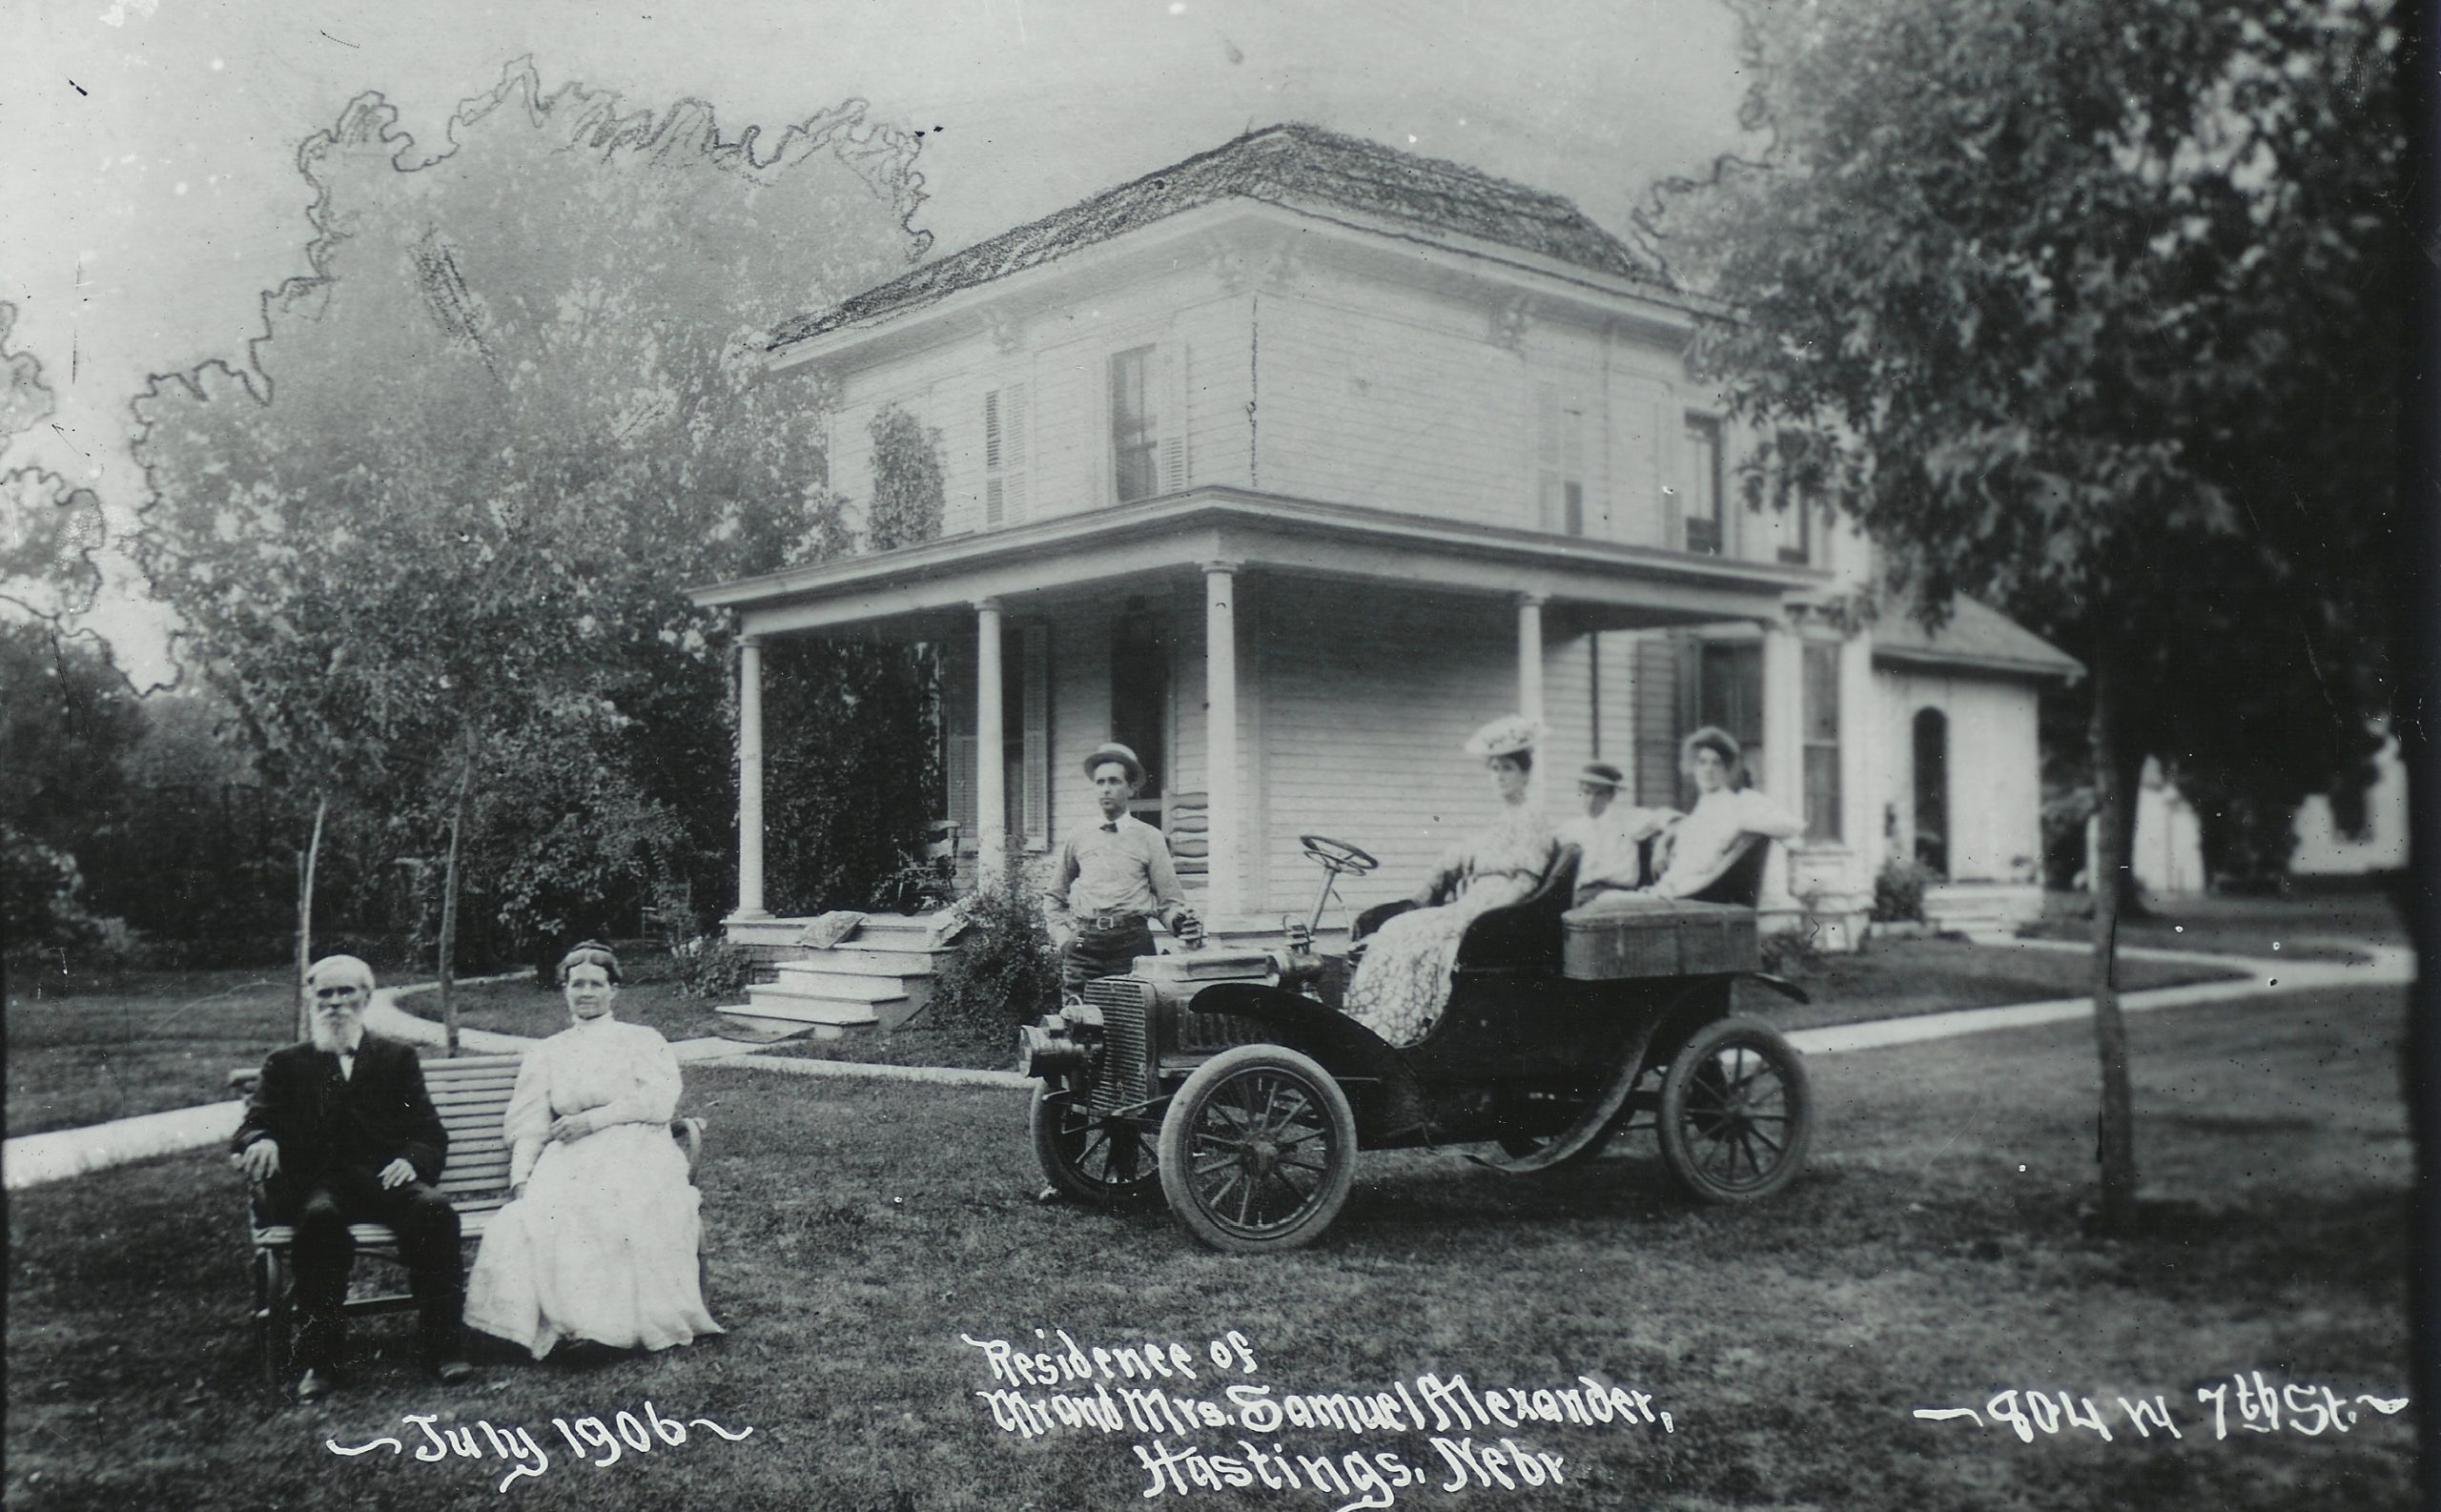 Mr. & Mrs. Alexander on bench, in front of their home, 1906. Courtesy of Adams County Historical Society.